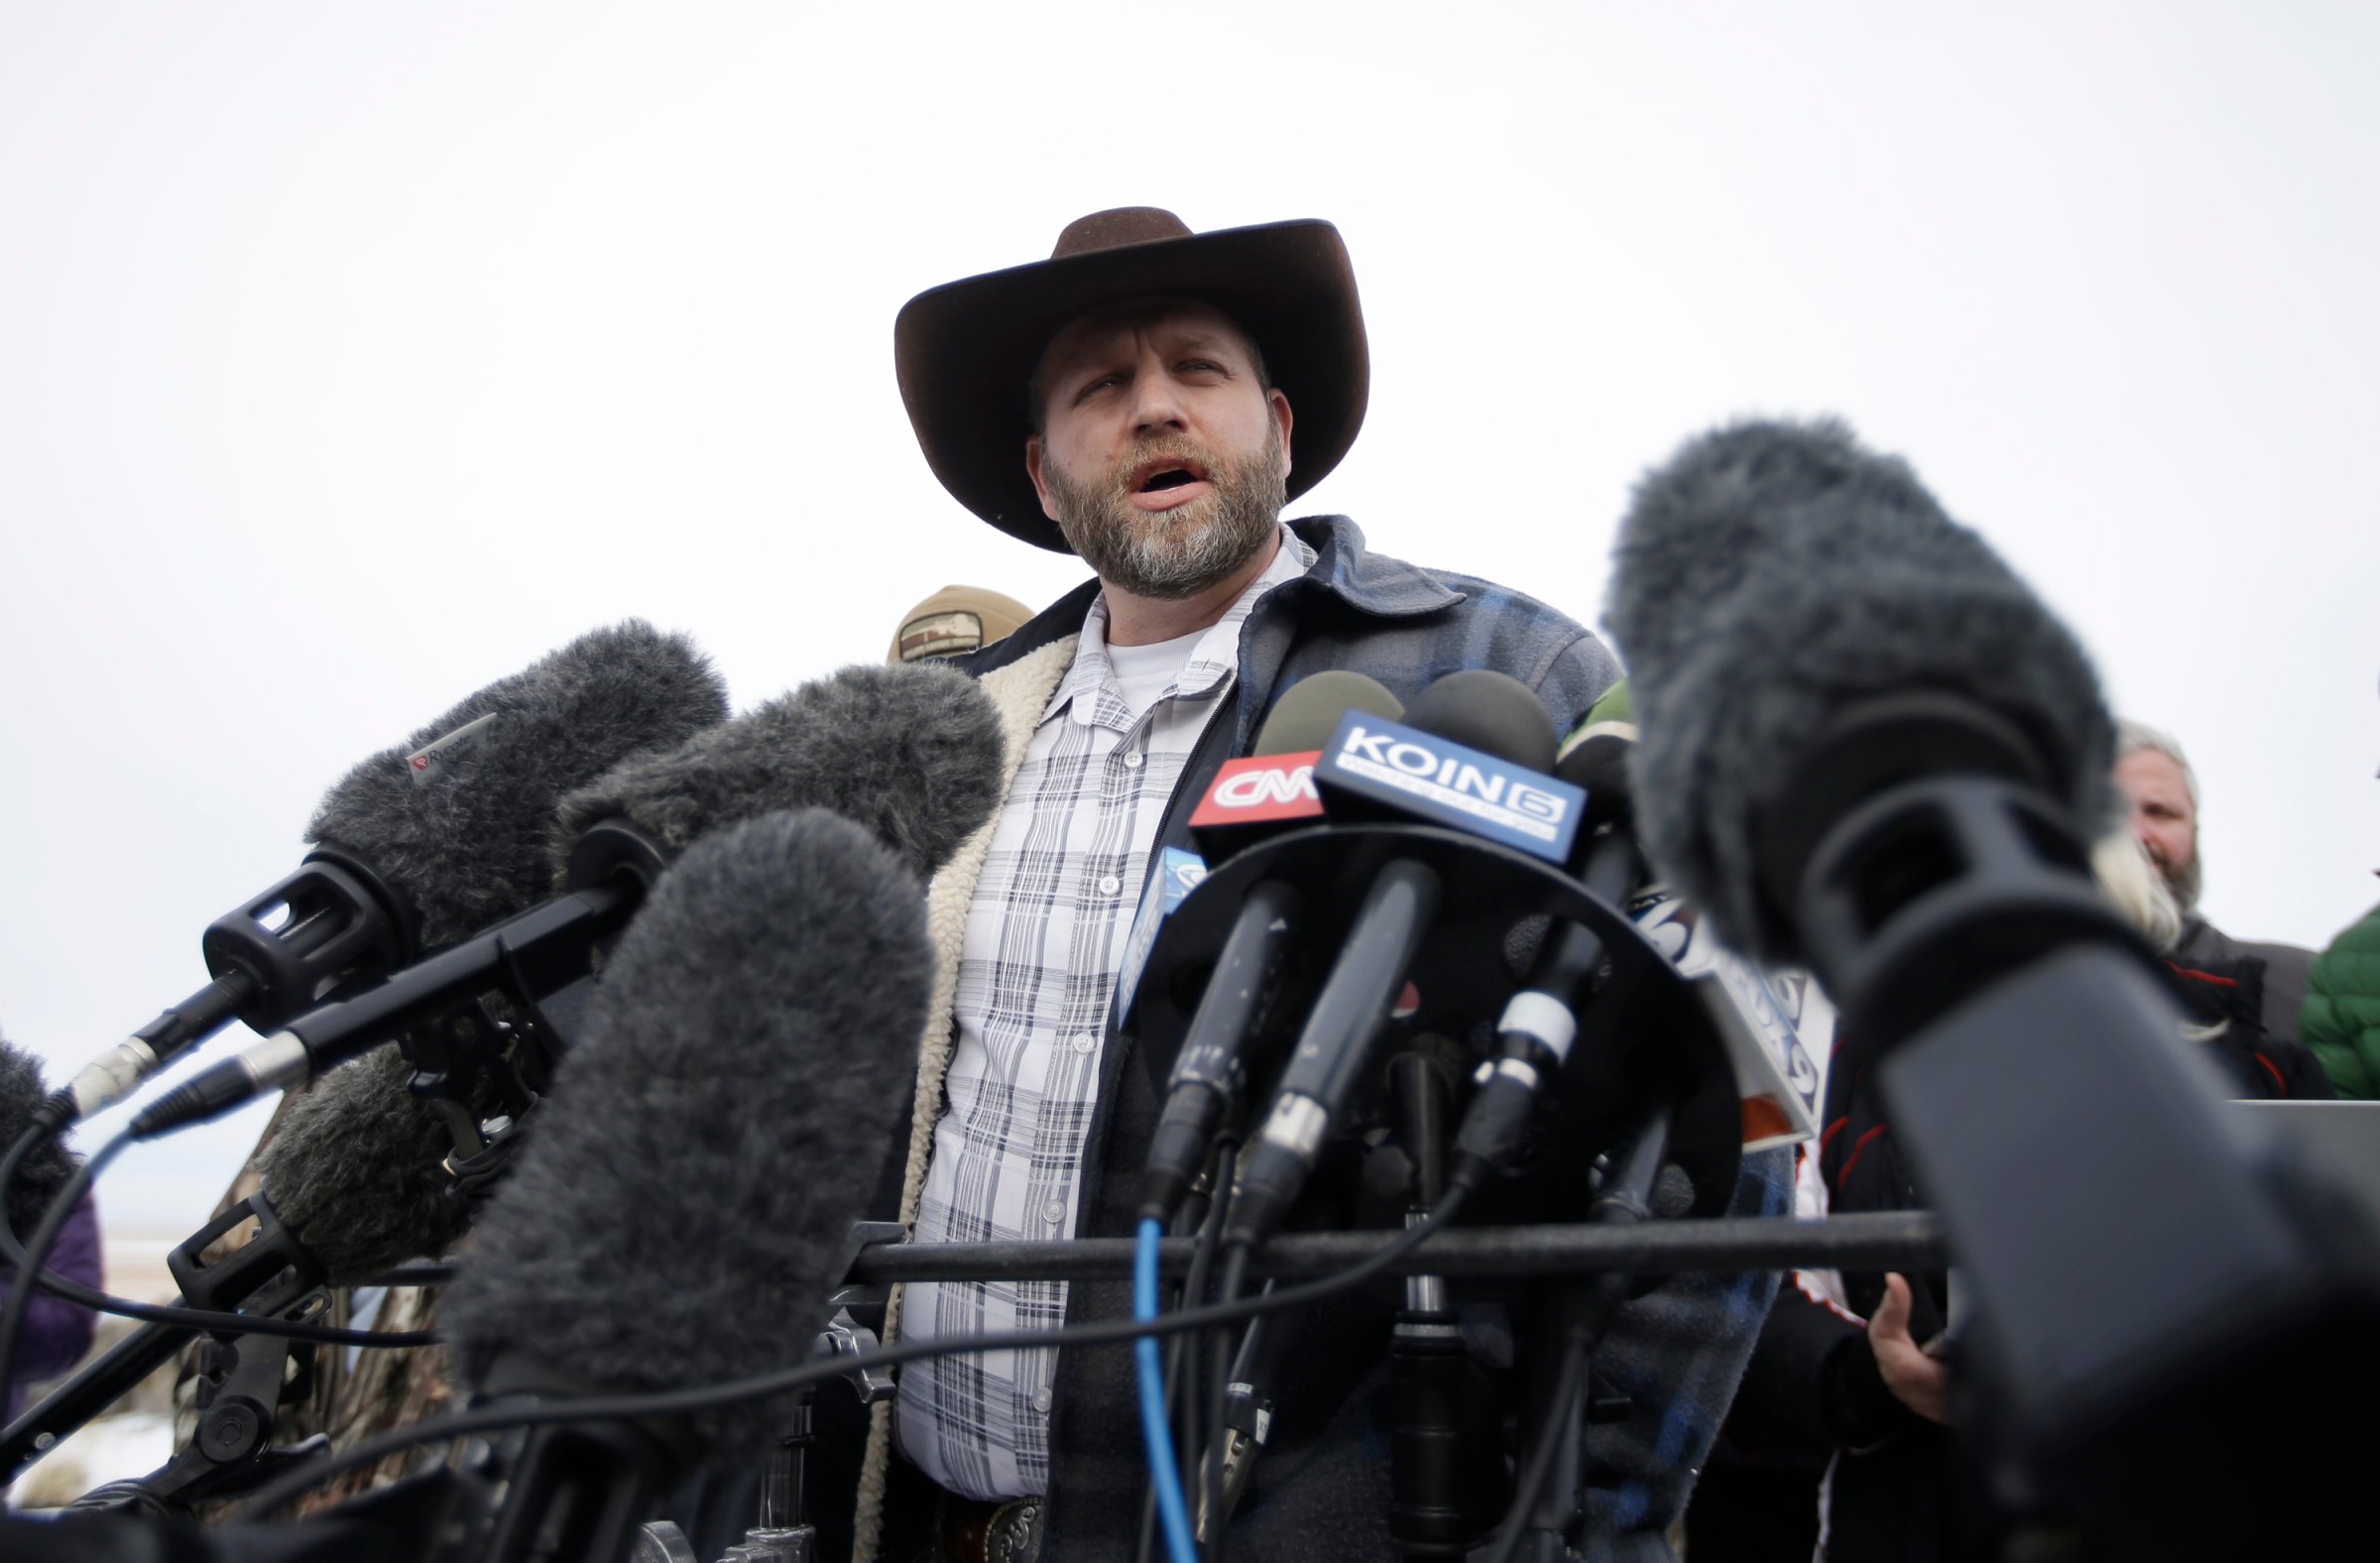 Ammon Bundy, one of the sons of Nevada rancher Cliven Bundy, speaks with reporters during a news conference at Malheur National Wildlife Refuge headquarters on Jan. 4, 2016, near Burns, Ore.